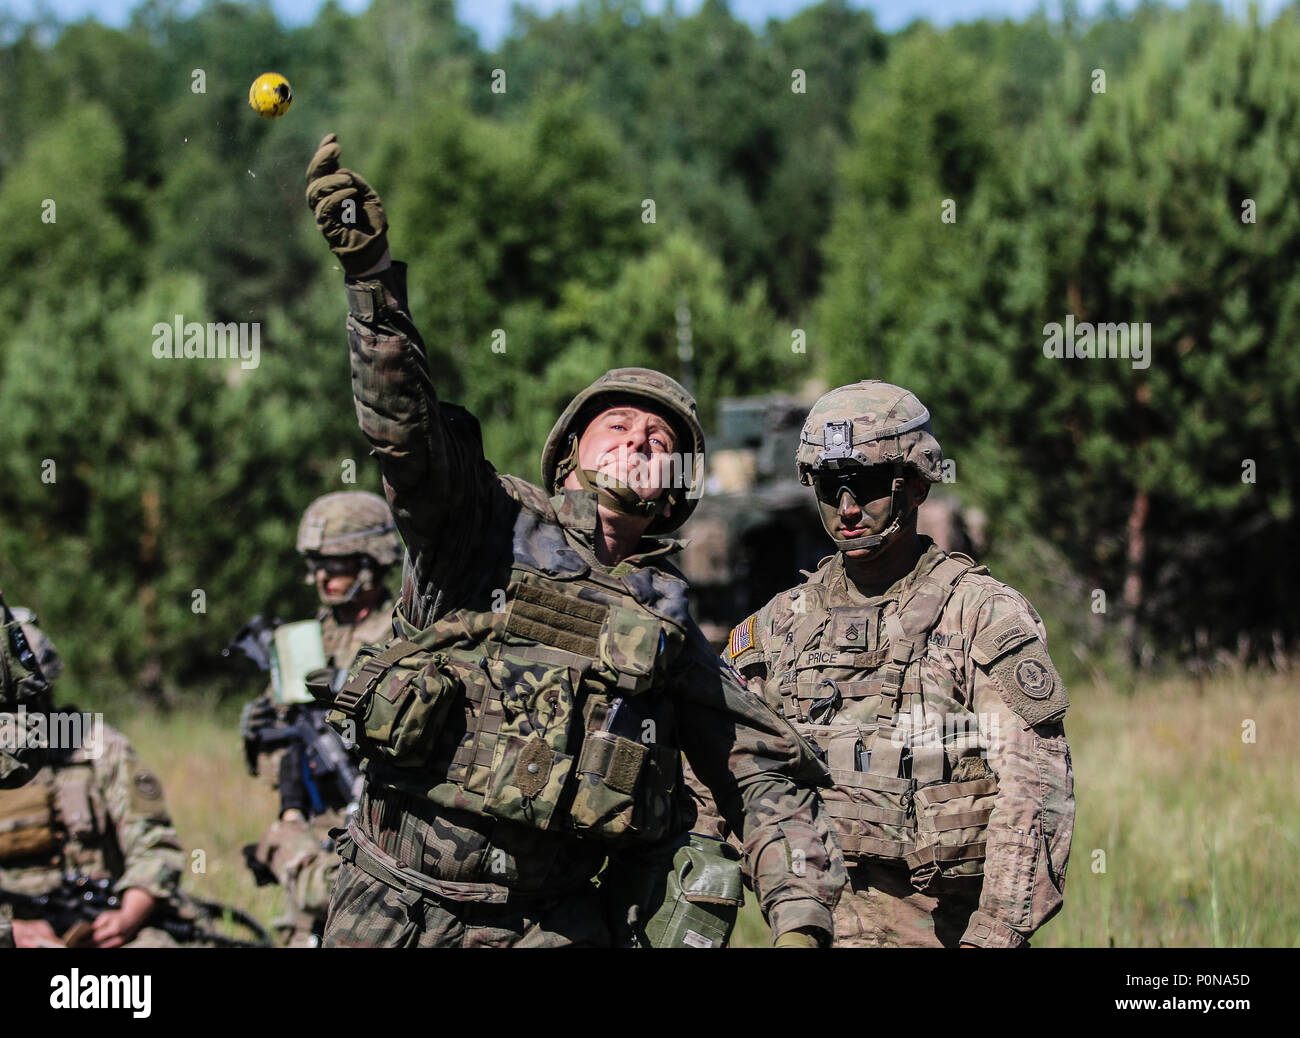 U.S. Army Staff Sgt. Mitchel Price (right), Little Chute, Wisconsin native, squad leader with 1st Squadron, 2nd Cavalry Regiment, and Polish army Pvt. Luckasz Wons, with 15th Mechanized Brigade, throw training grenades during Puma 2 Exercise as a part of Saber Strike 18 with Battle Group Poland at Wyreby, Poland on June 7, 2018. This year's exercise, which runs from June 3-15, tests allies and partners from 19 countries on their ability work together to deter aggression in the region and improve each unit's ability to perform their designated mission. (U.S. Army photo by Spc. Hubert D. Delany  Stock Photo